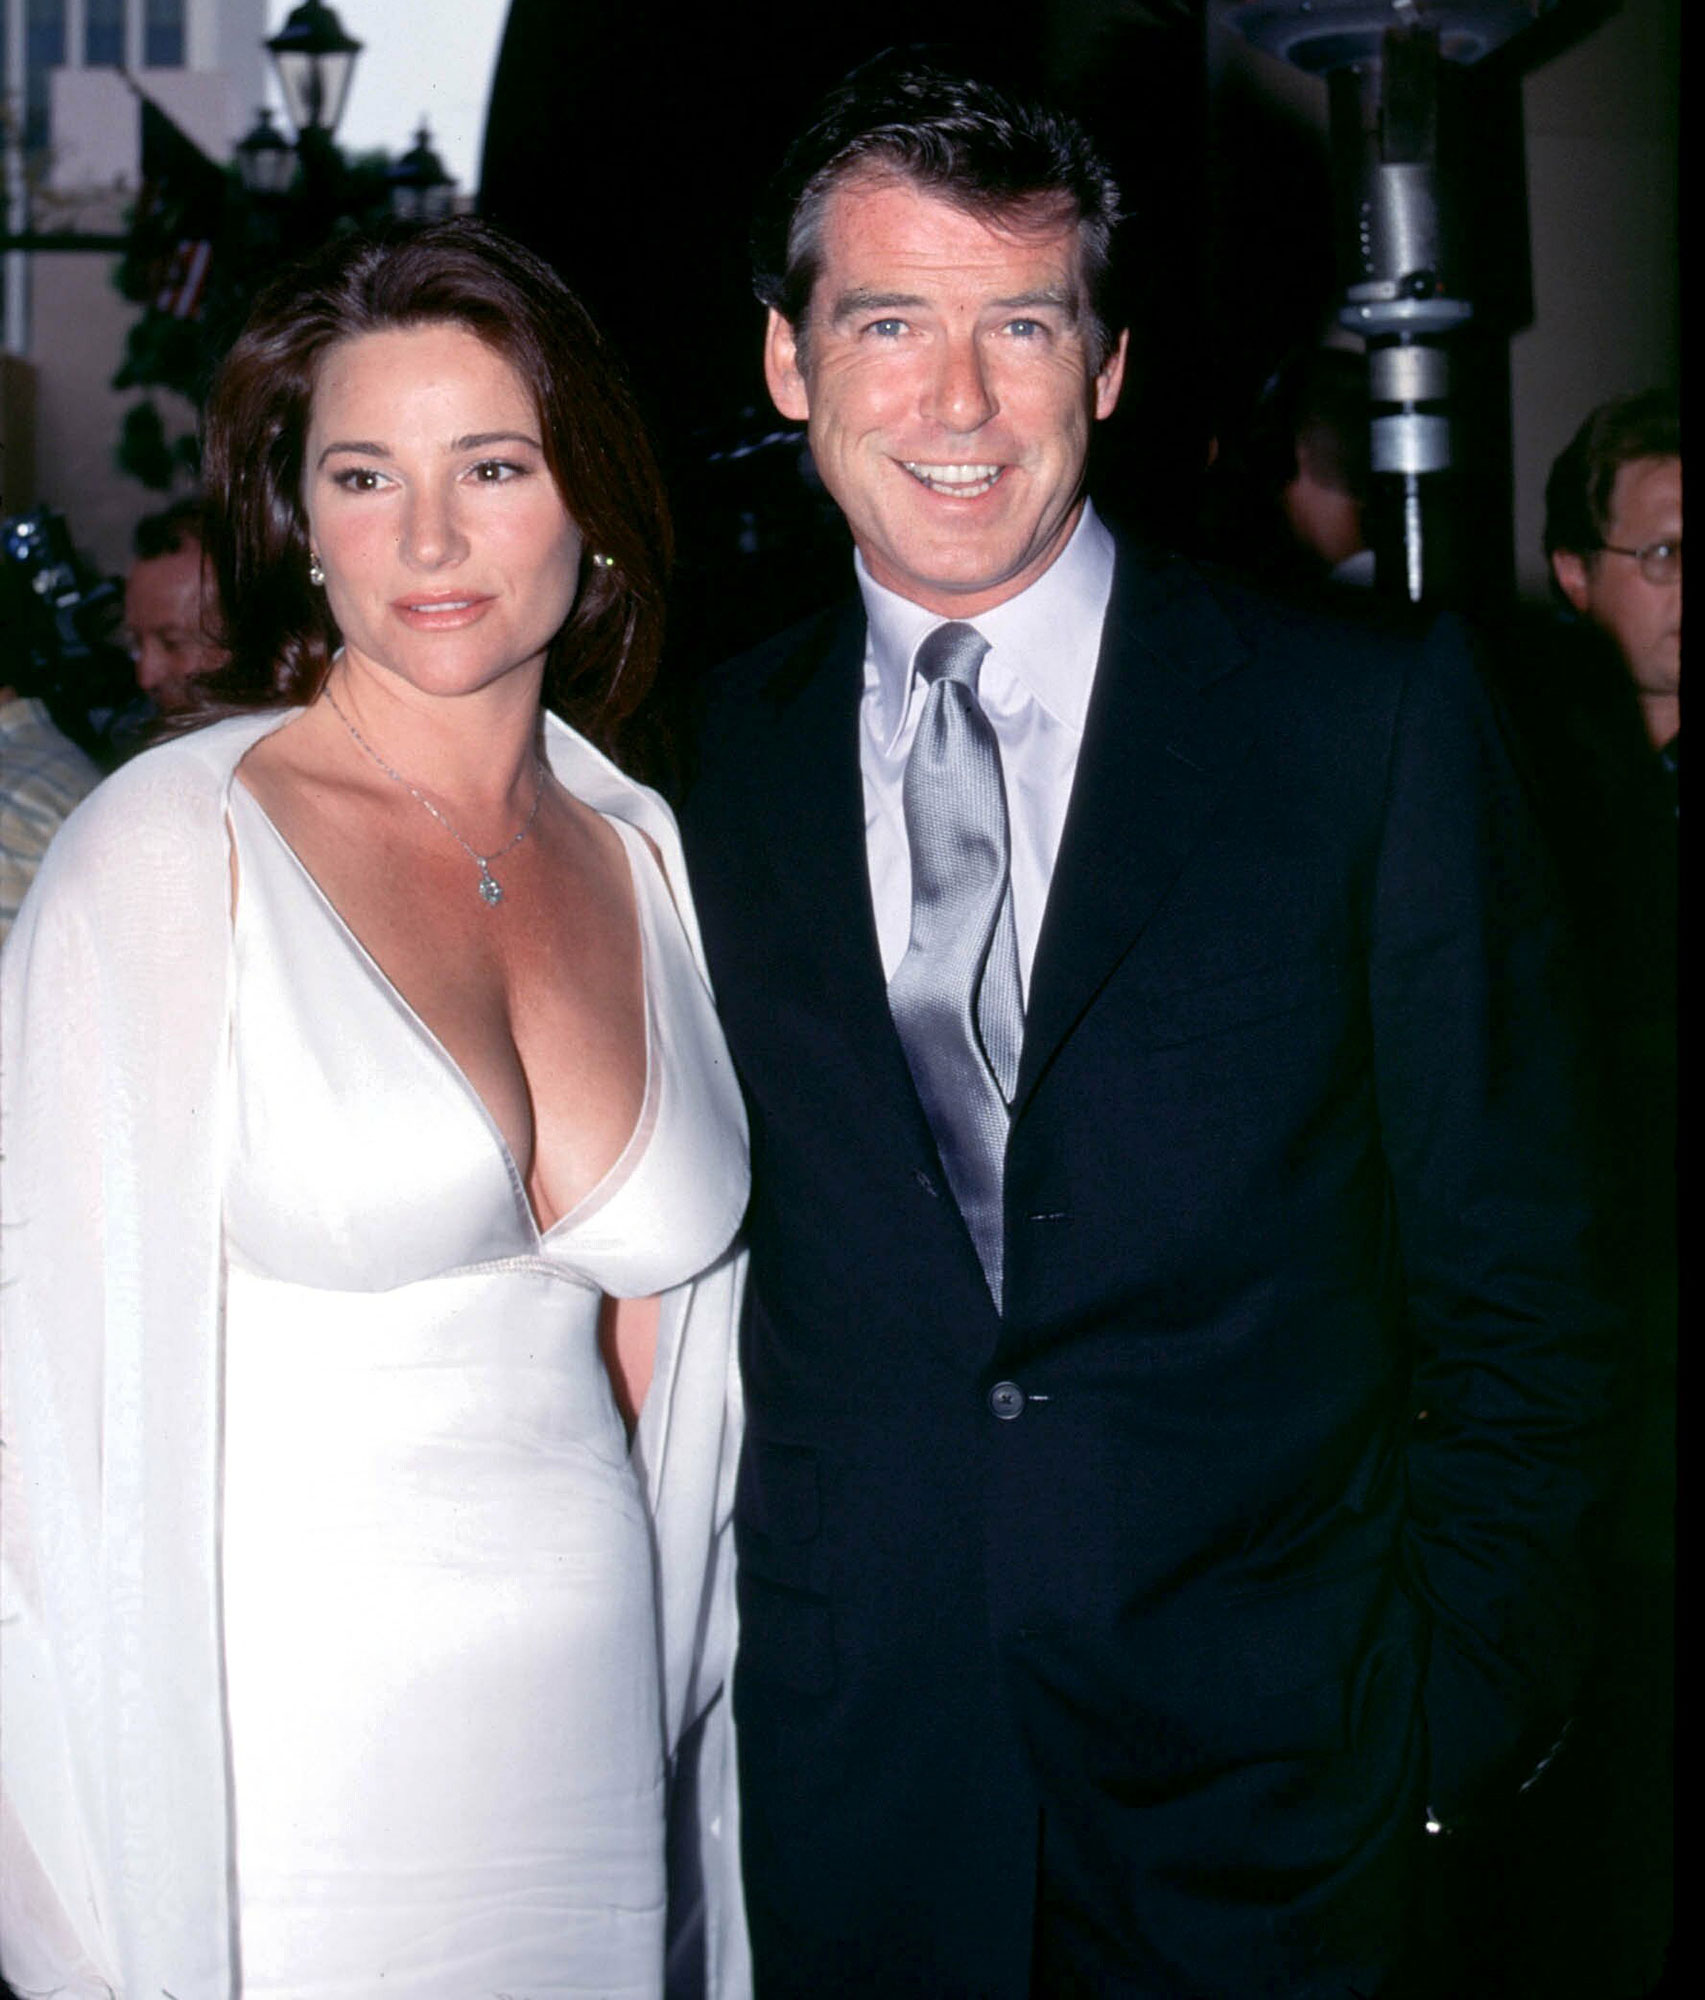 Pierce Brosnan's Wife Keely Shaye Smith, Marriages & Kids - Parade